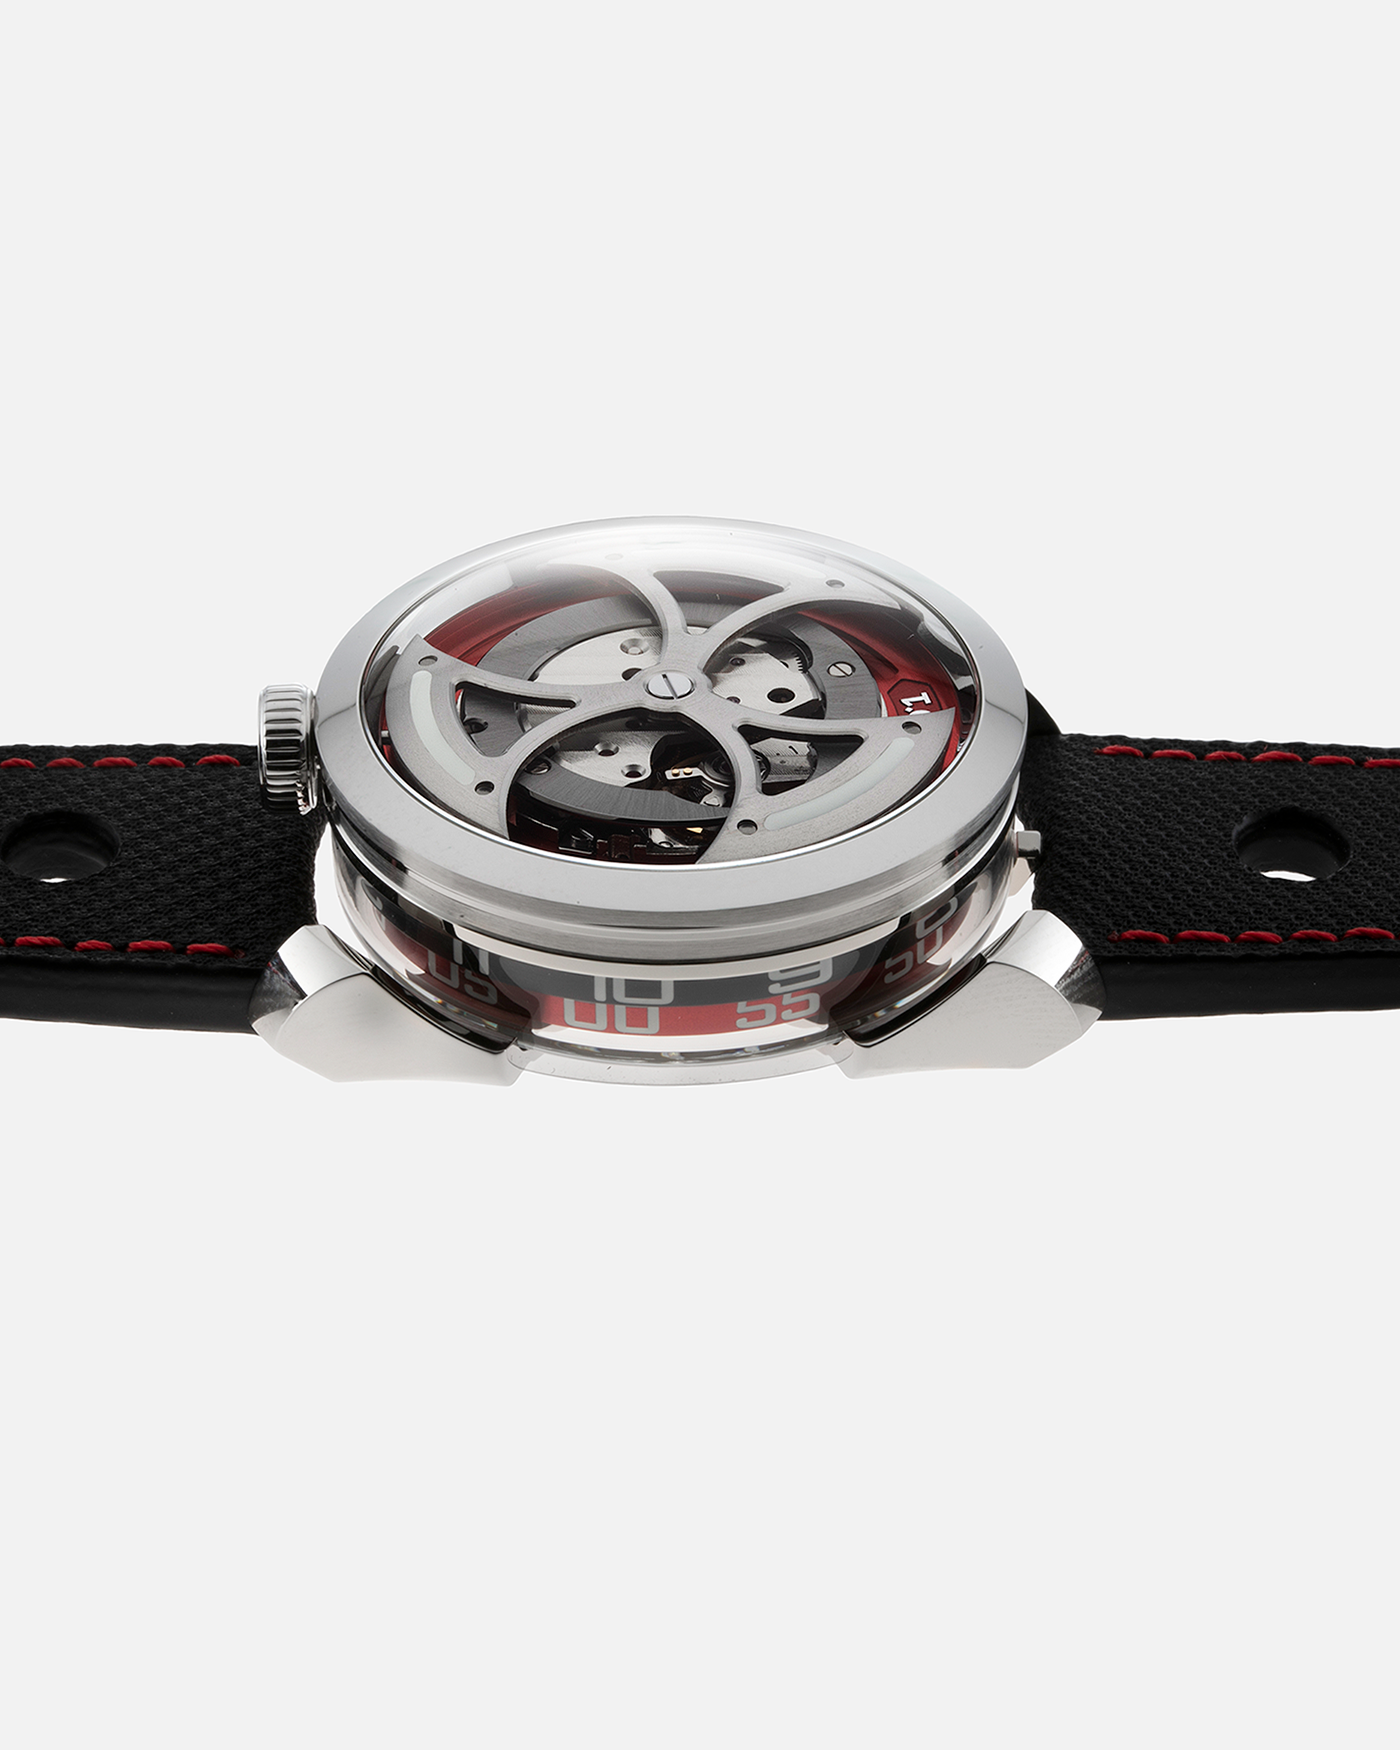 Brand: MB&F Year: 2022 Model: MAD 1 Material: Stainless Steel and Titanium Movement: Miyota Cal 821A Case Diameter: 42mm Bracelet/Strap: MB&F Black Calfskin Leather with Red Stitching and Stainless Steel Deployant Buckle